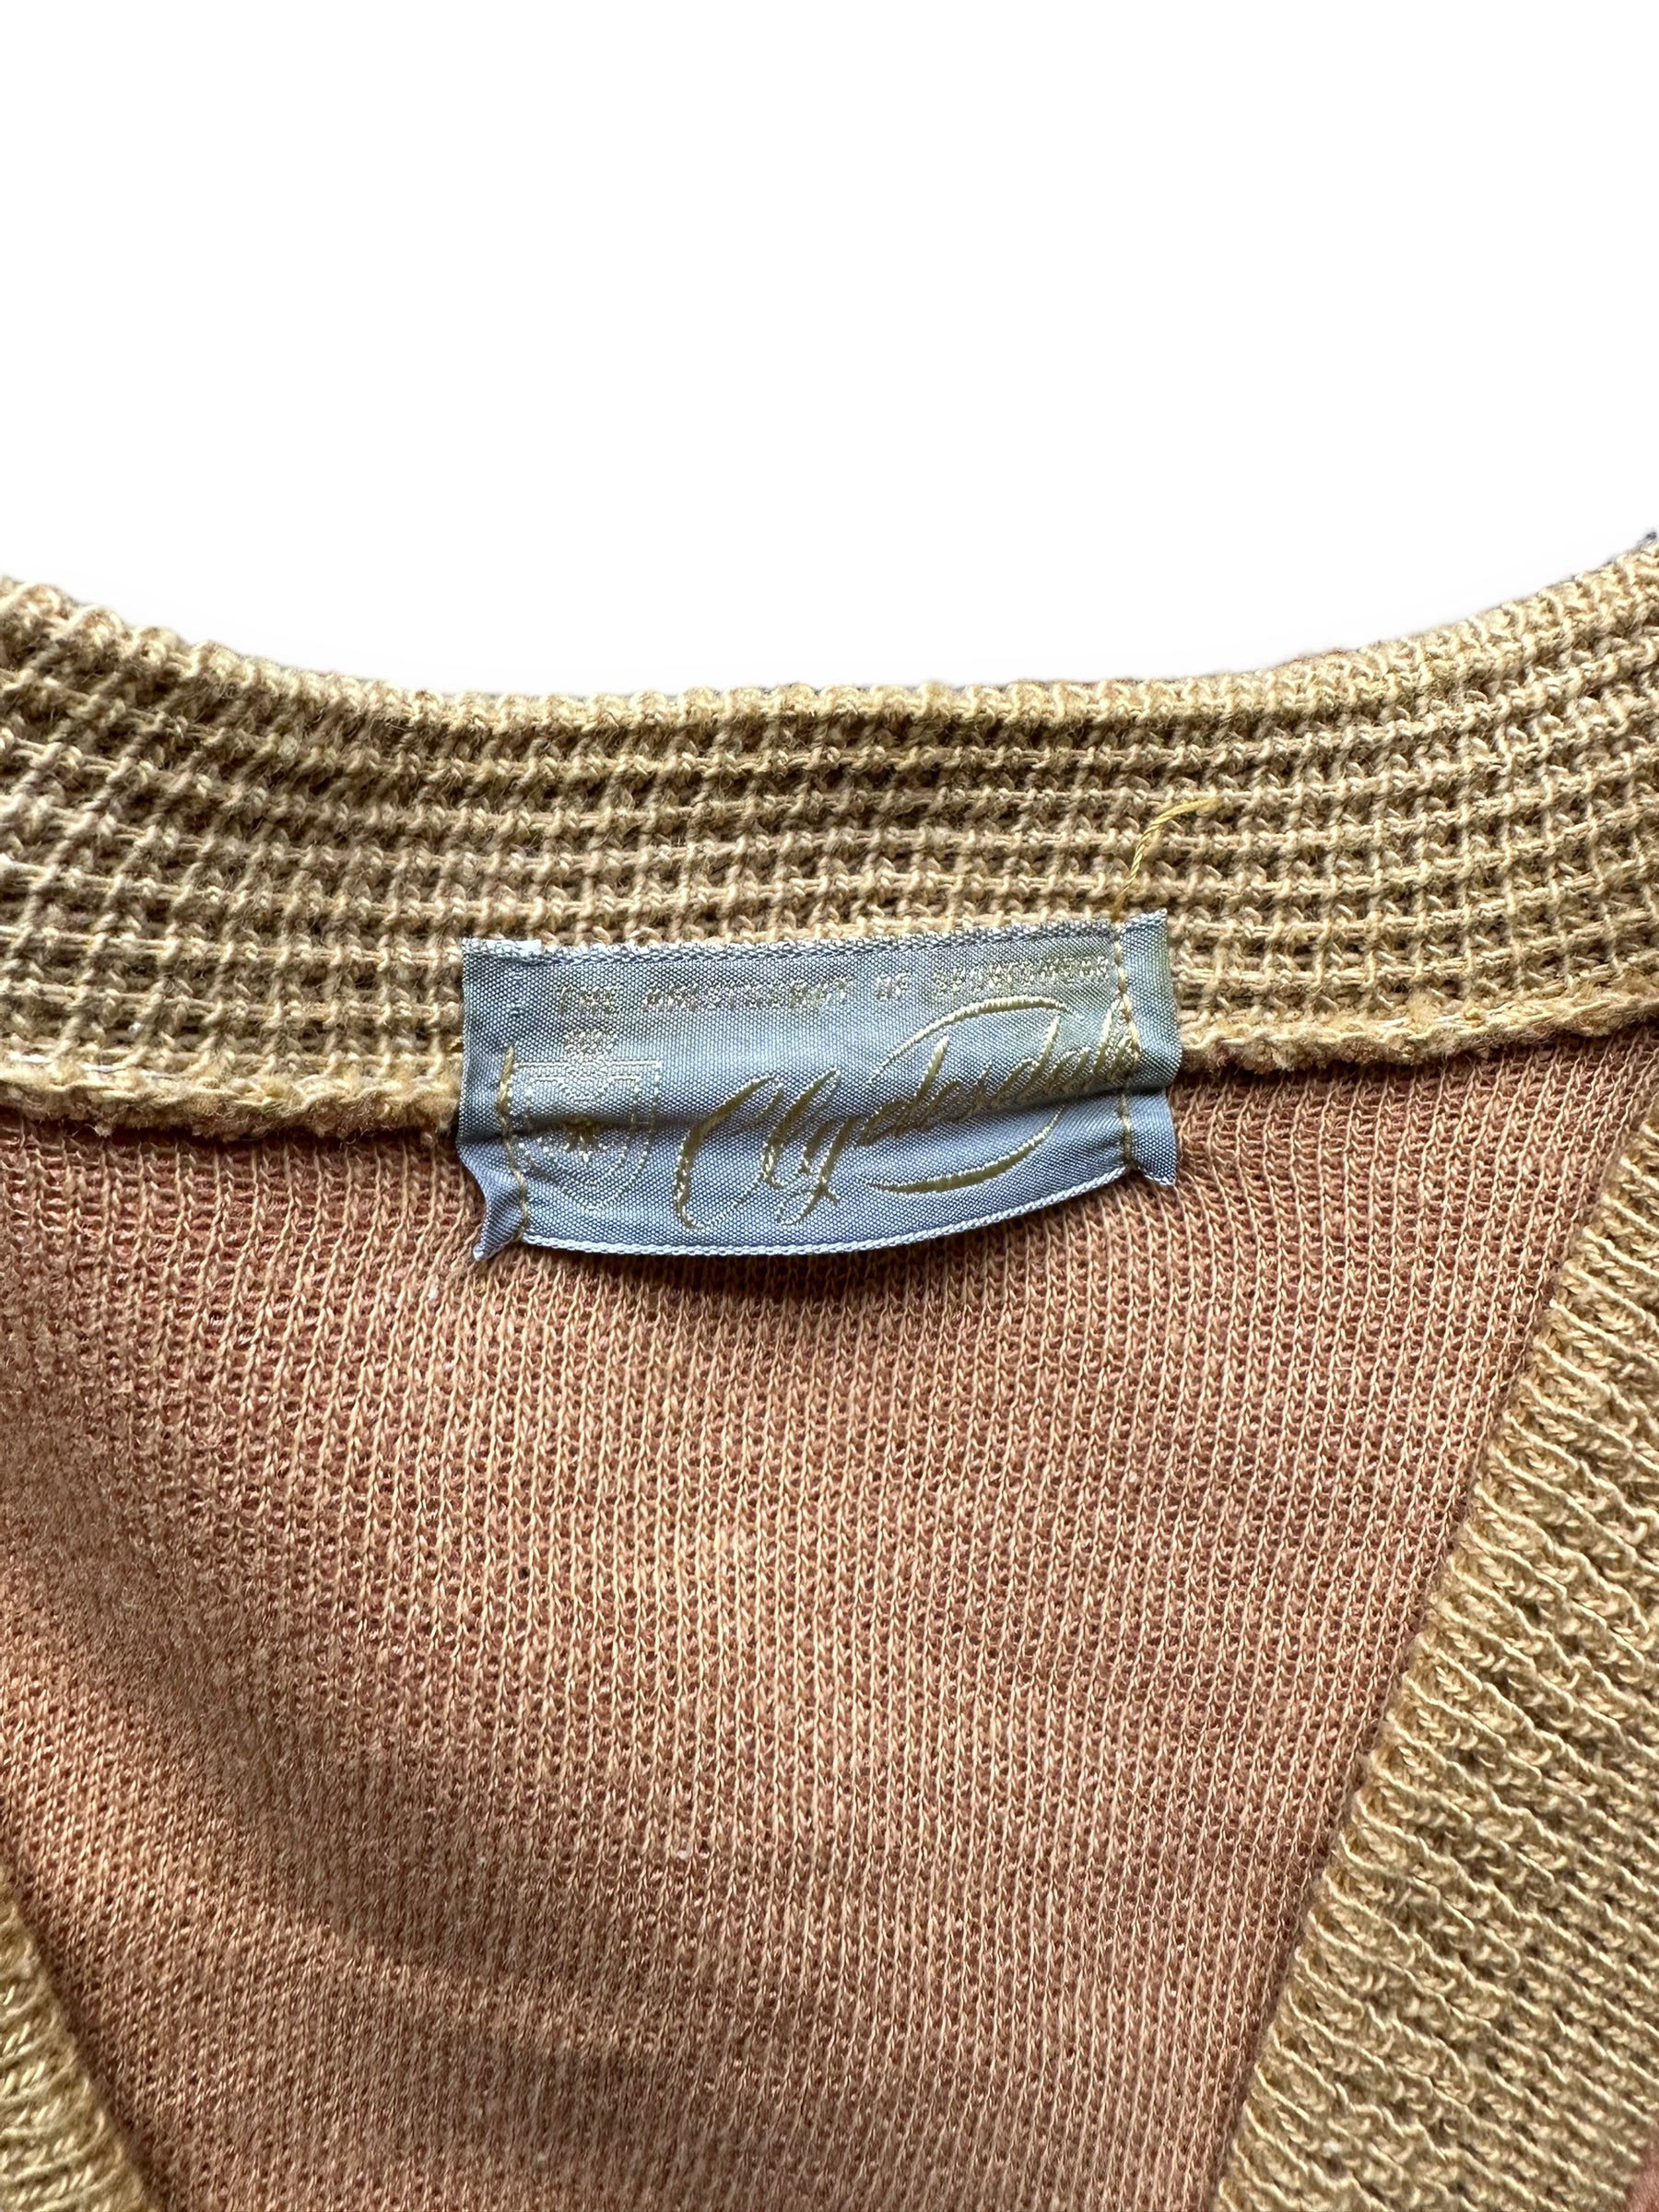 Tag View of Vintage 1930s Clydesdale Cardigan SZ L | Vintage Cardigan Sweaters | Vintage Clothing Seattle